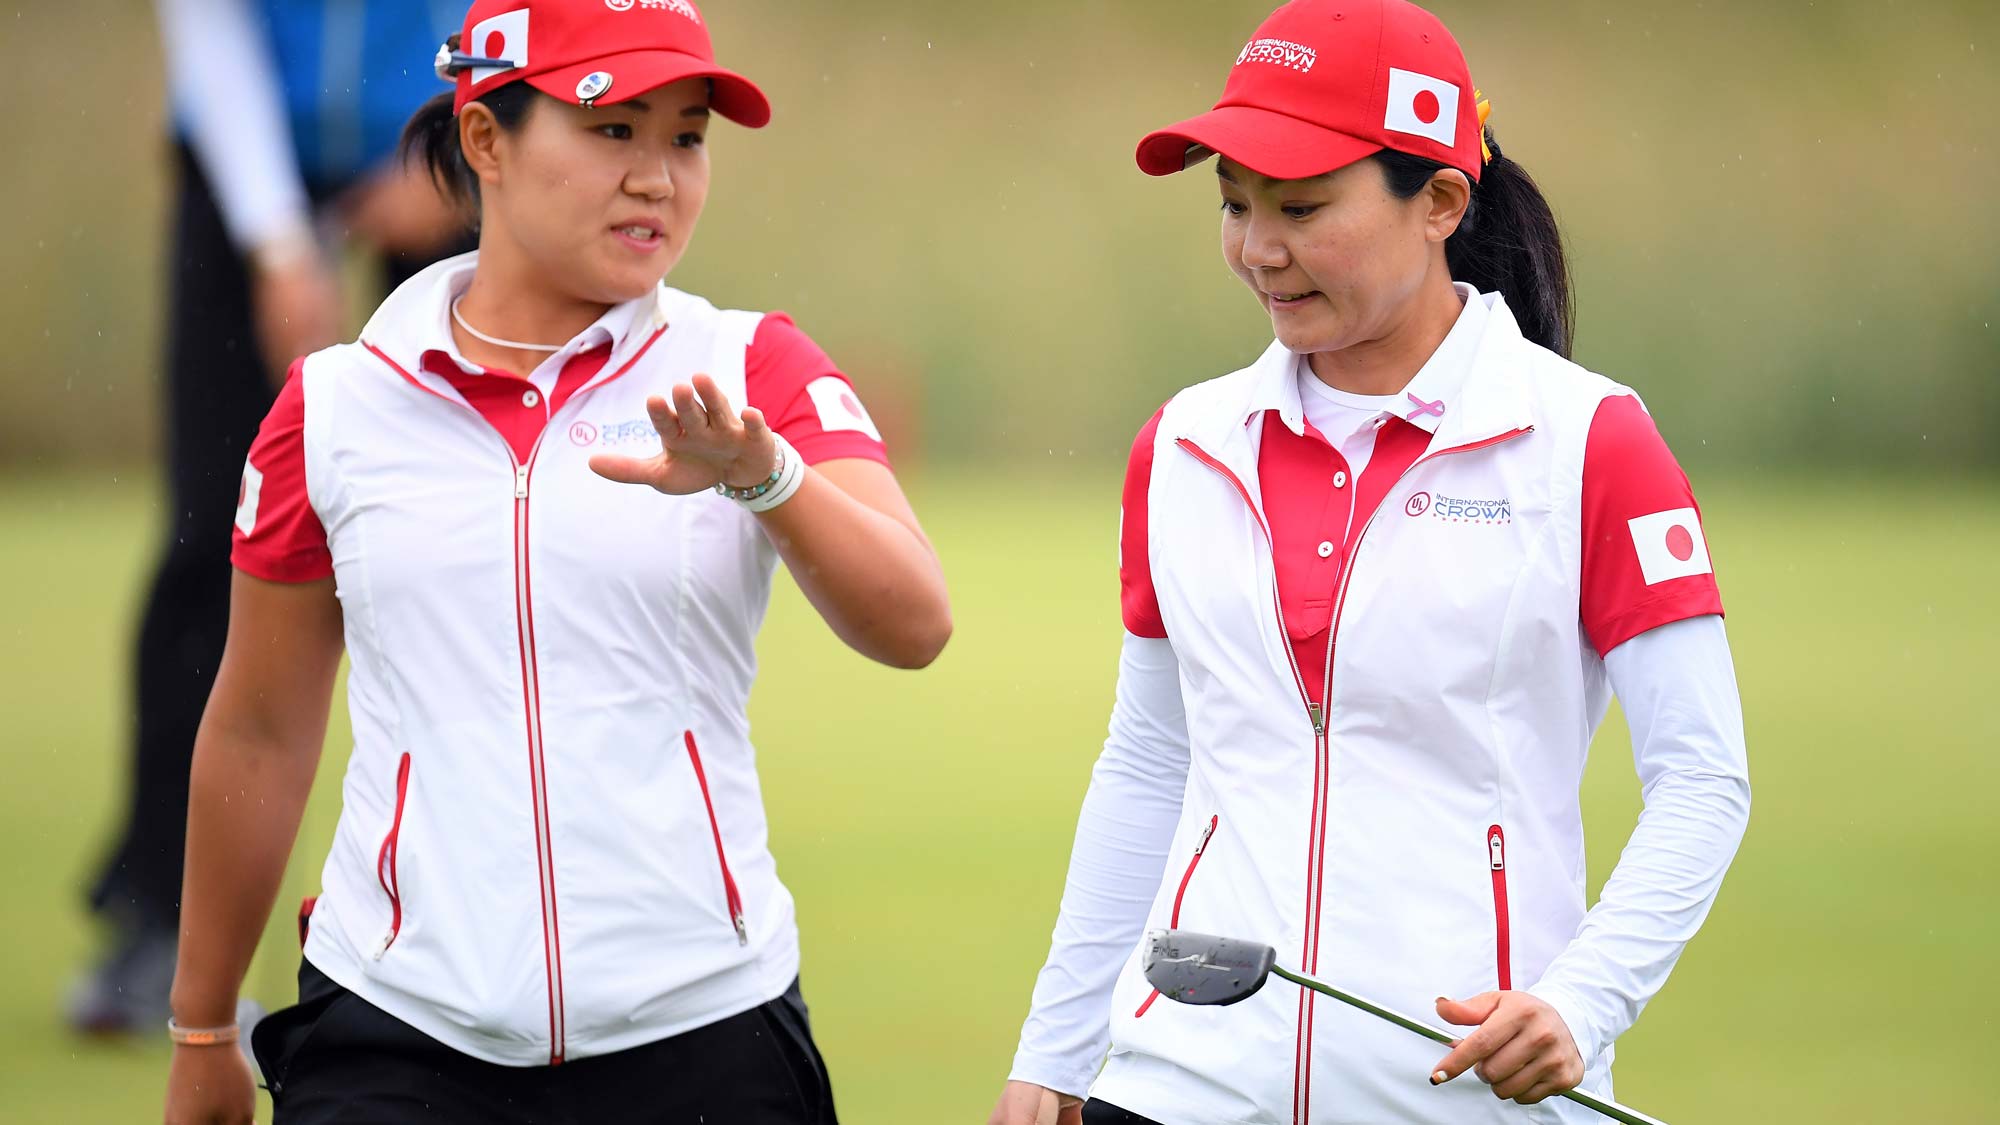 Nasa Hataoka (L) and Ayako Uehara (R) of Japan talk on the 4th green in the Pool B match between Japan and Sweden on day two of the UL International Crown